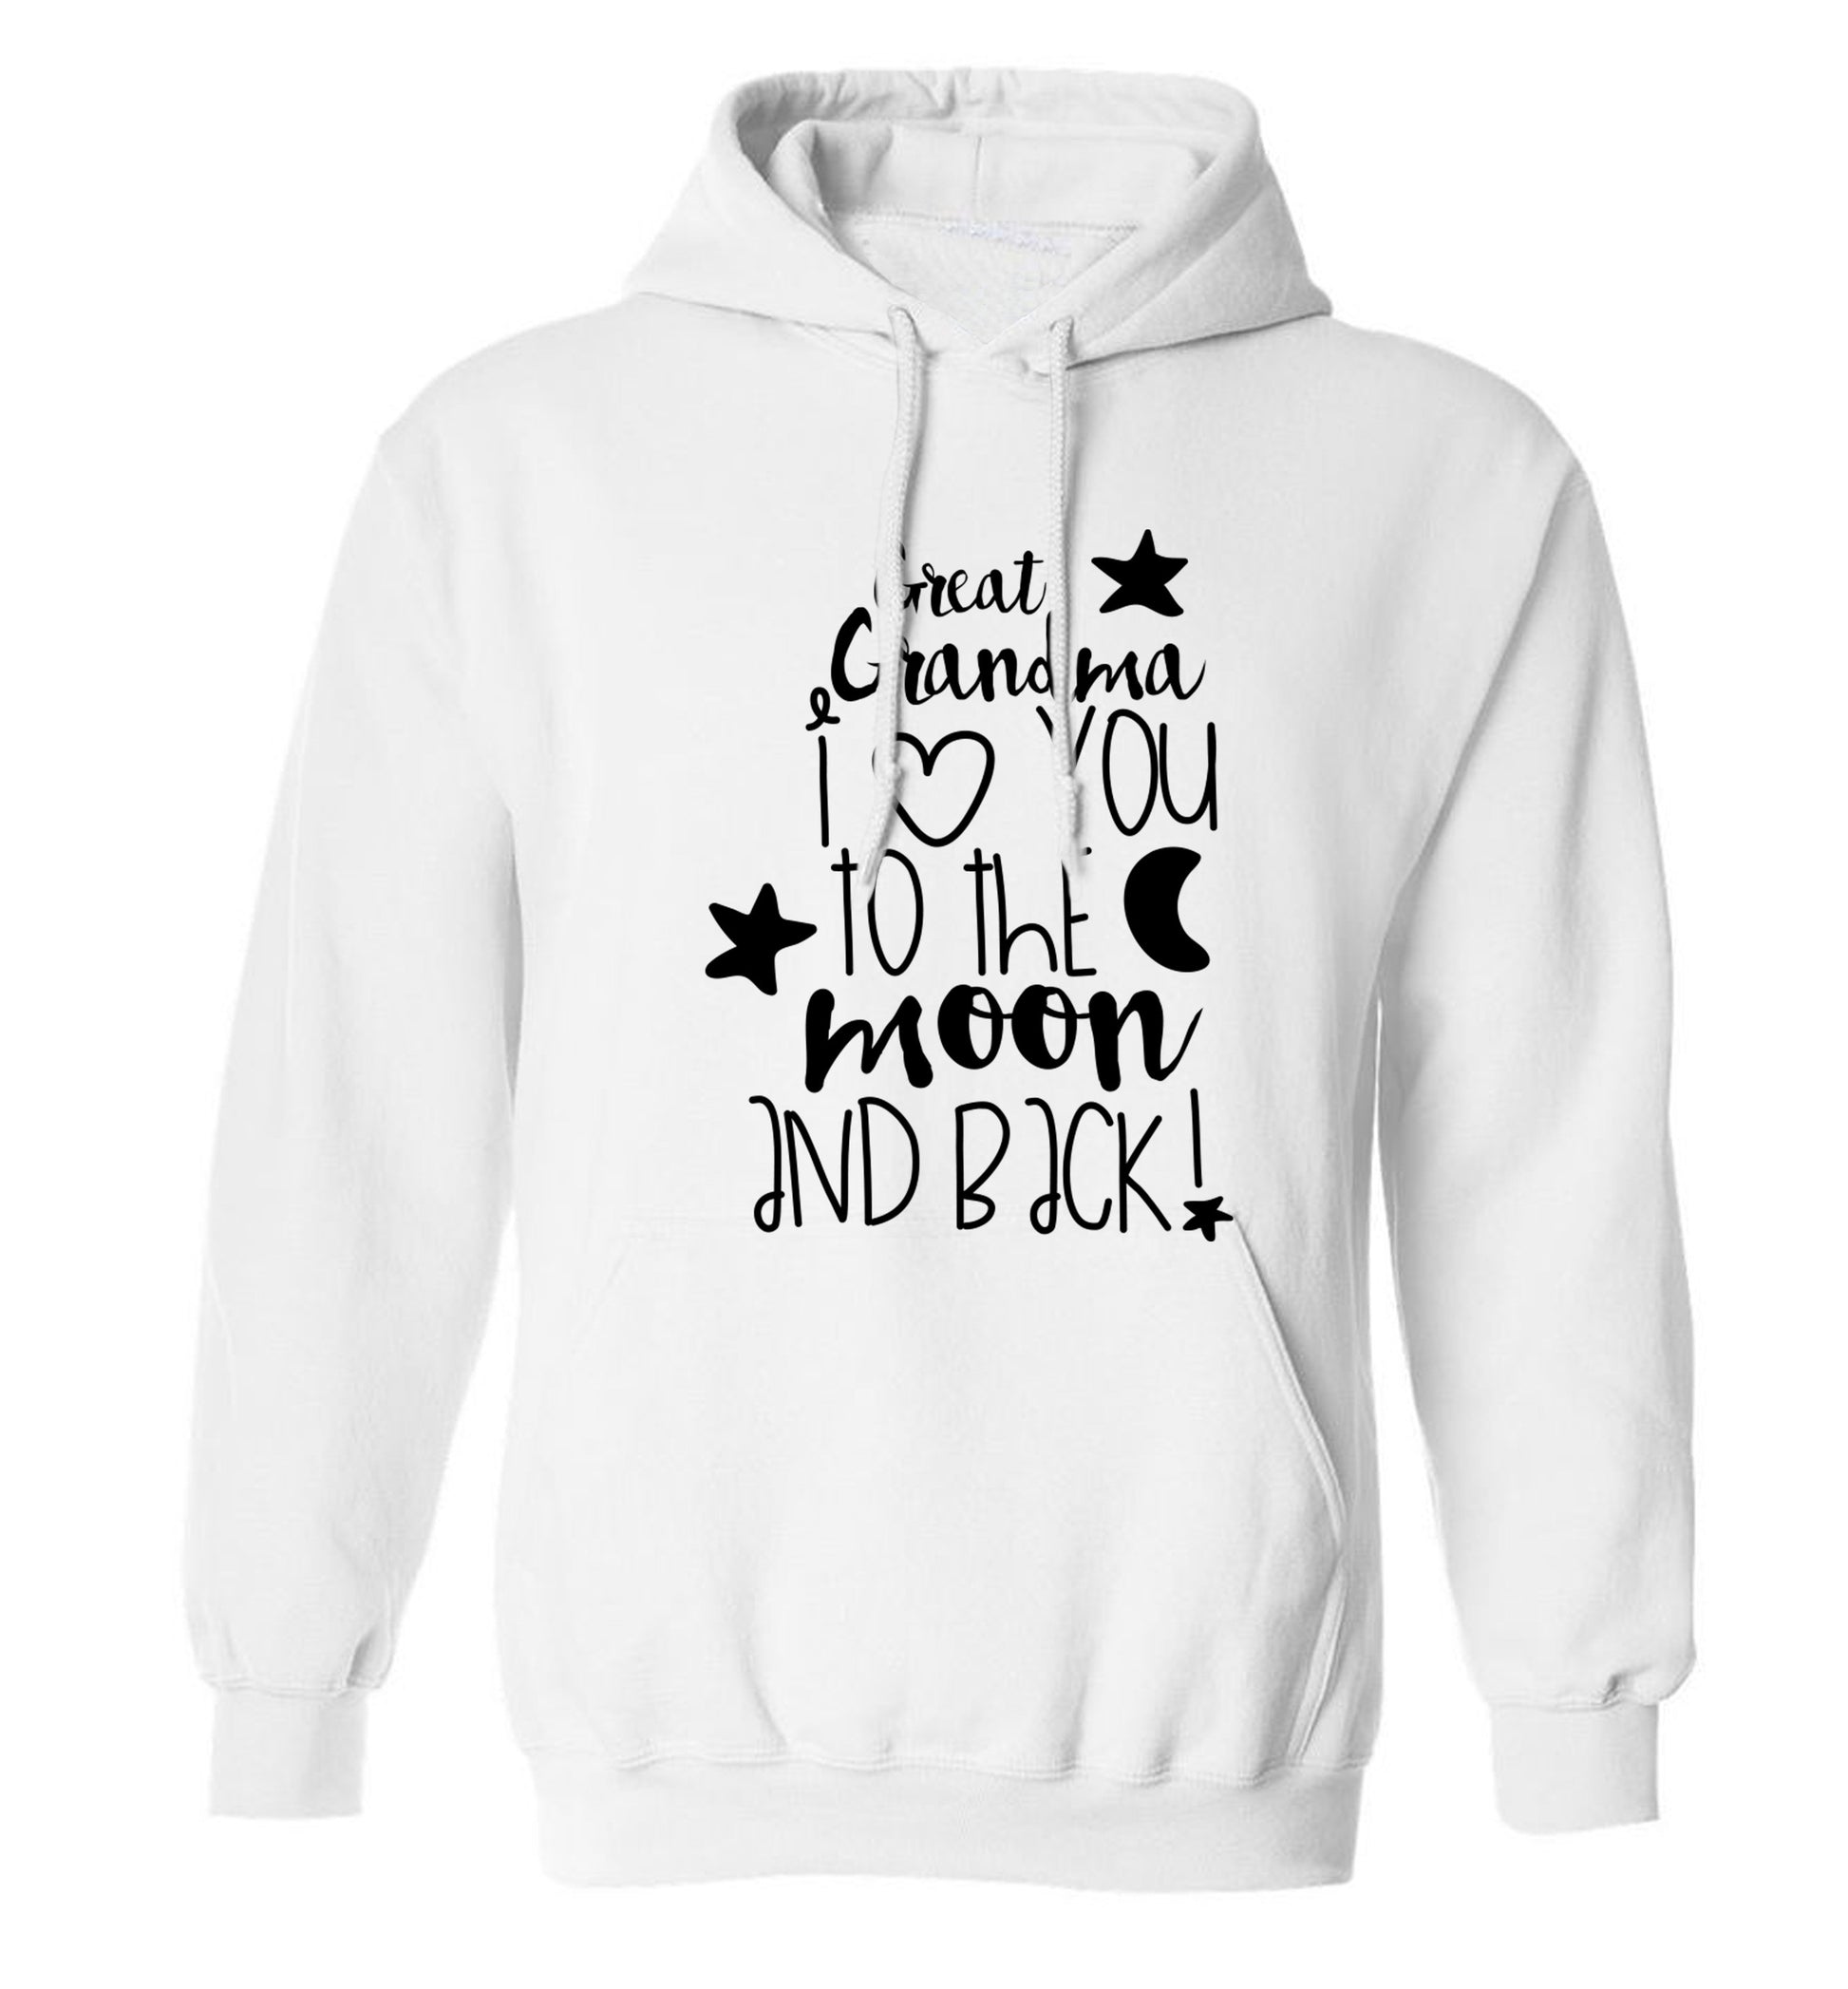 Great Grandma I love you to the moon and back adults unisex white hoodie 2XL